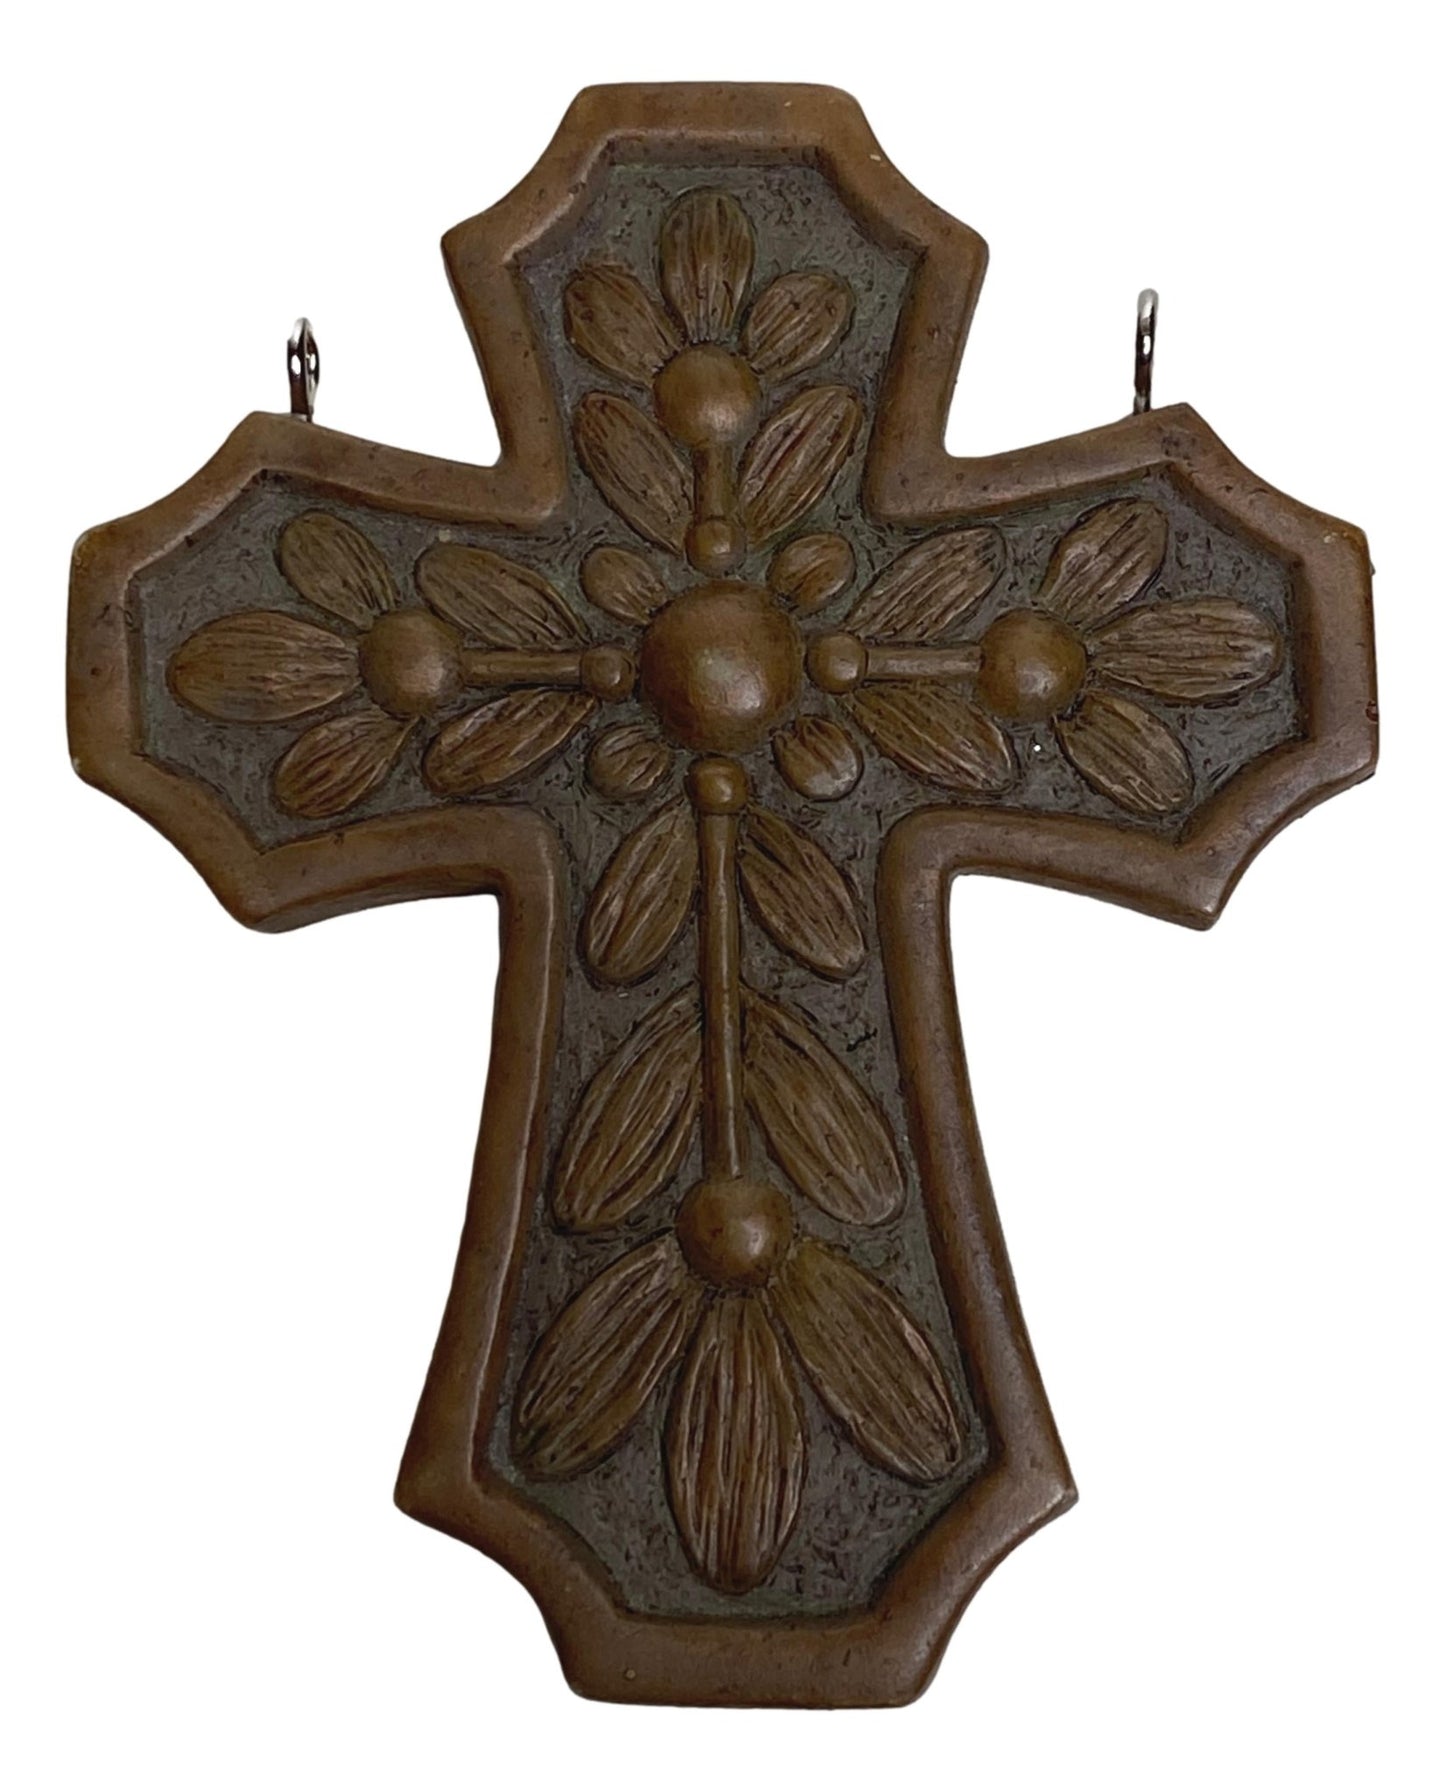 Cross Resin Door Hang Floral Design 4 1/4 L x 3 1/2 W Inches - Ysleta Mission Gift Shop- VOTED 2022 El Paso's Best Gift Shop